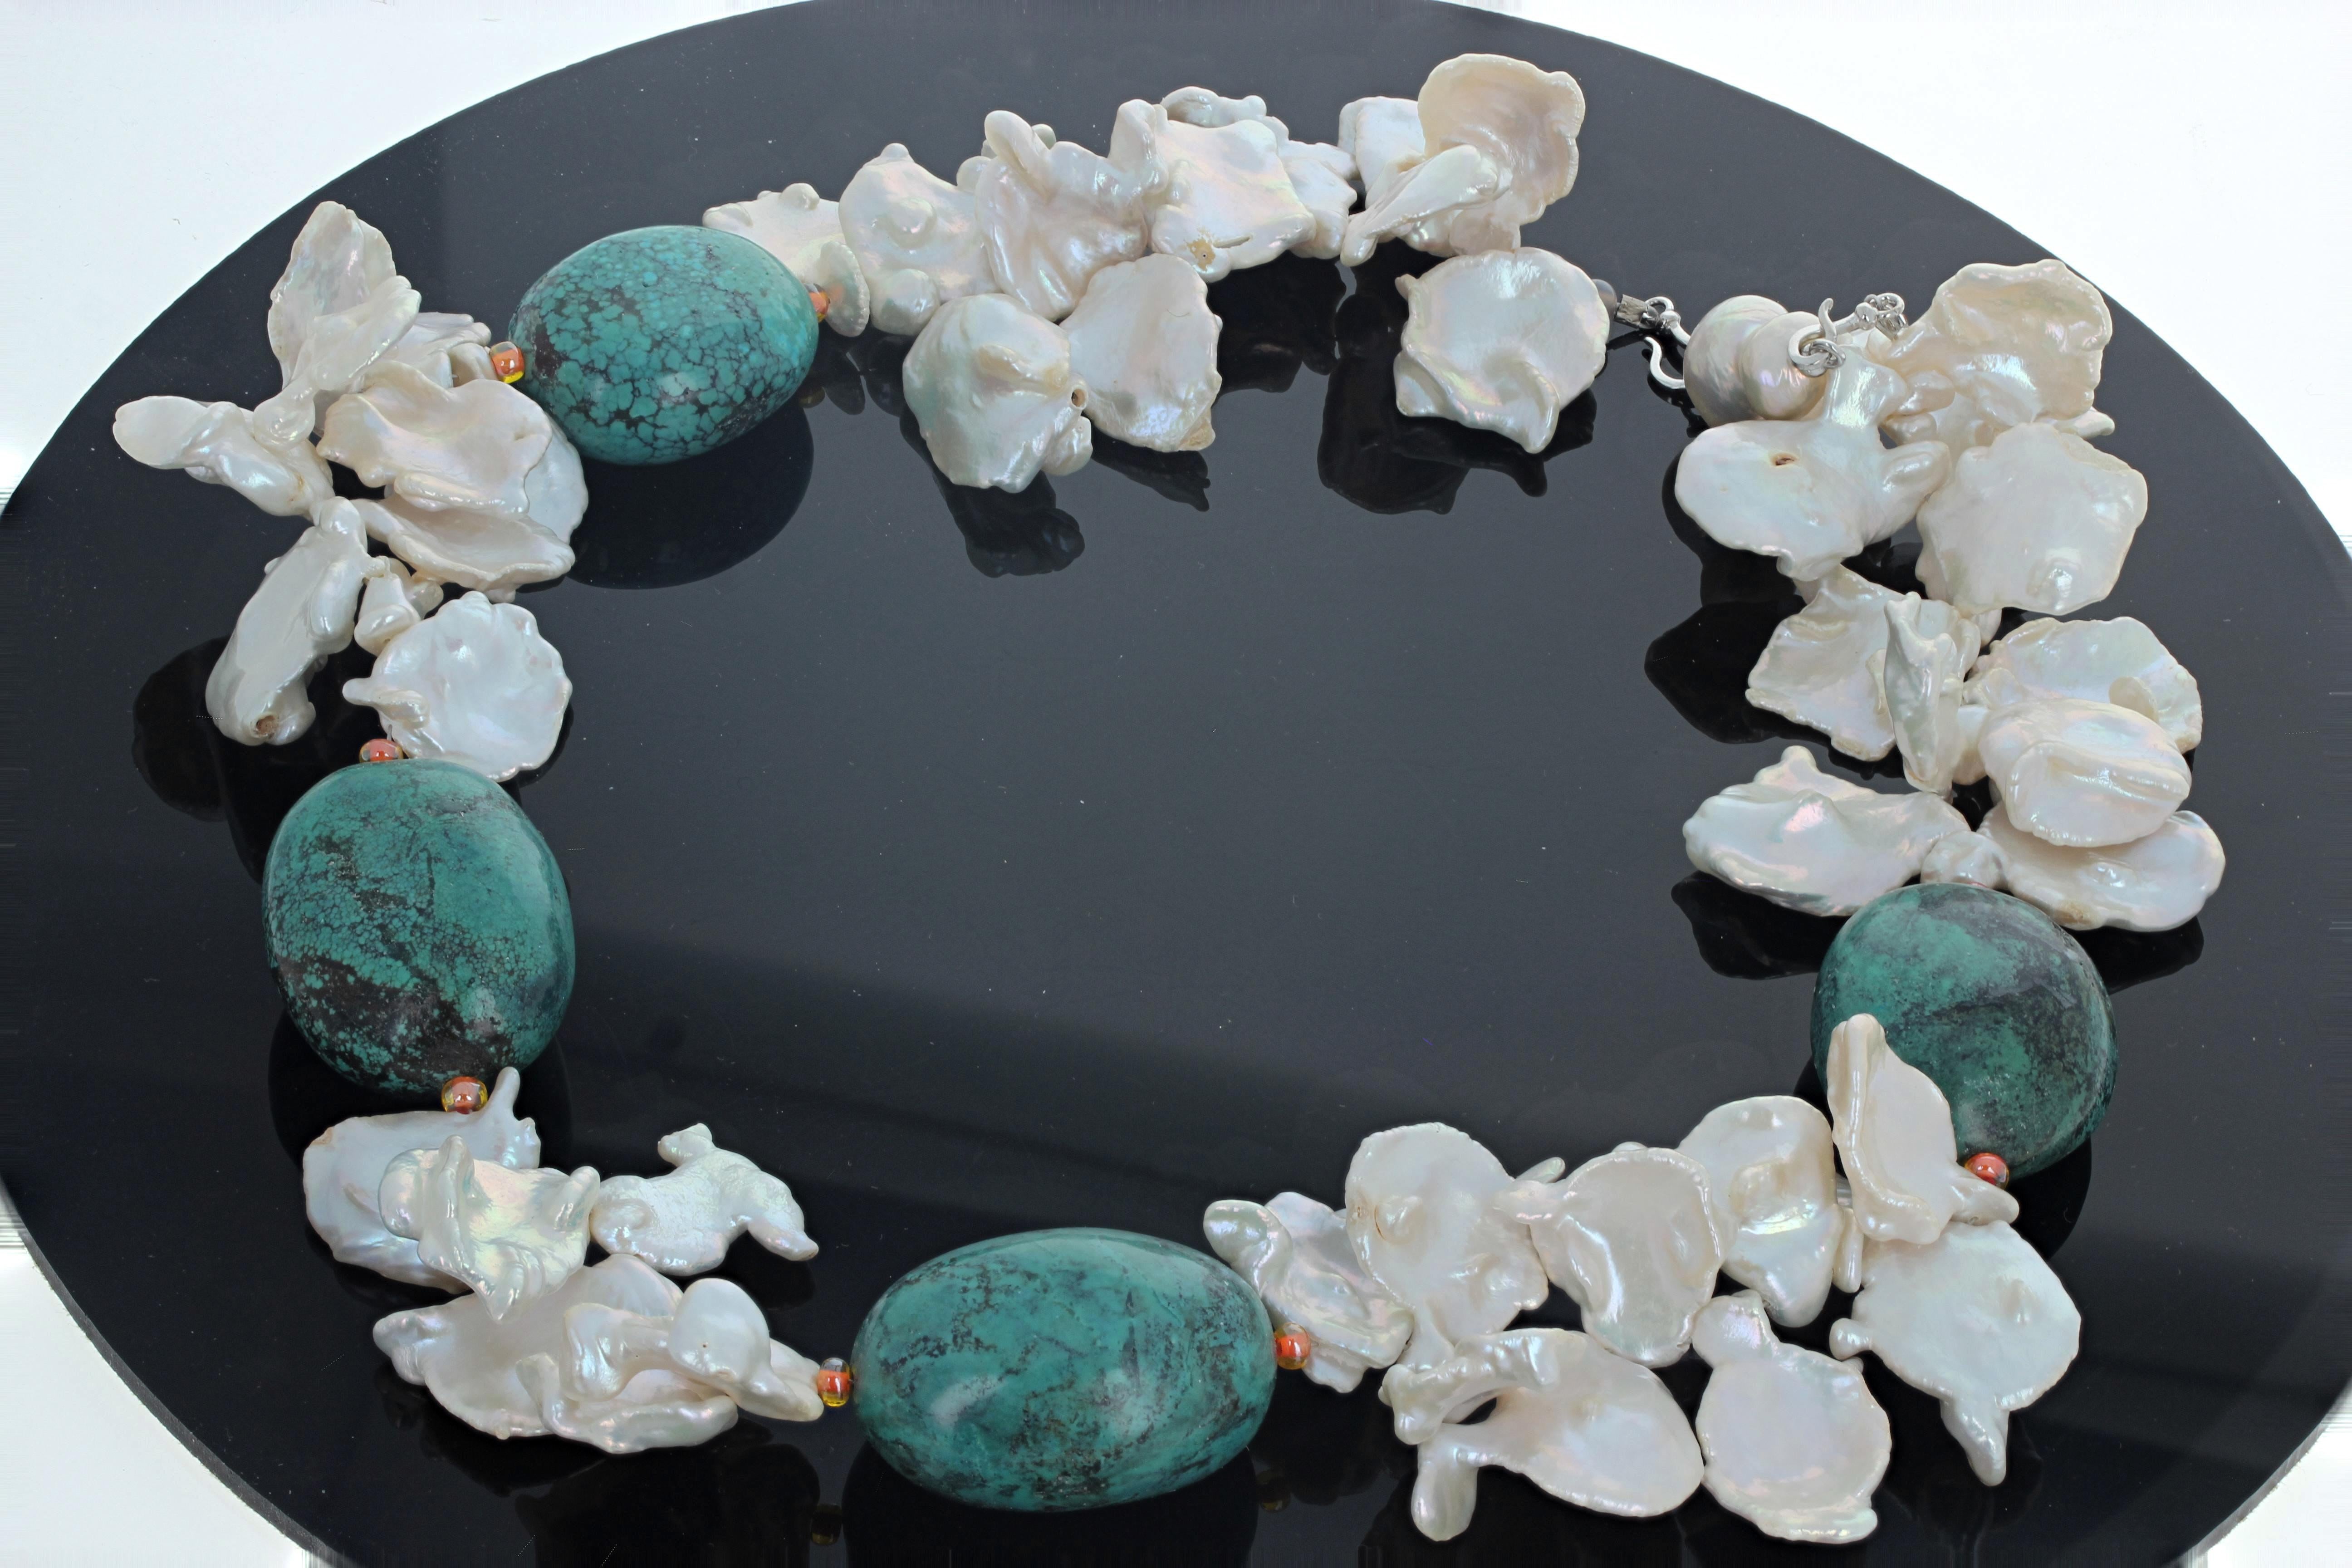 Mixed Cut AJD Glowing Bright Natural FlipFlop Pearls & Polished Turquoise 21 Necklace For Sale